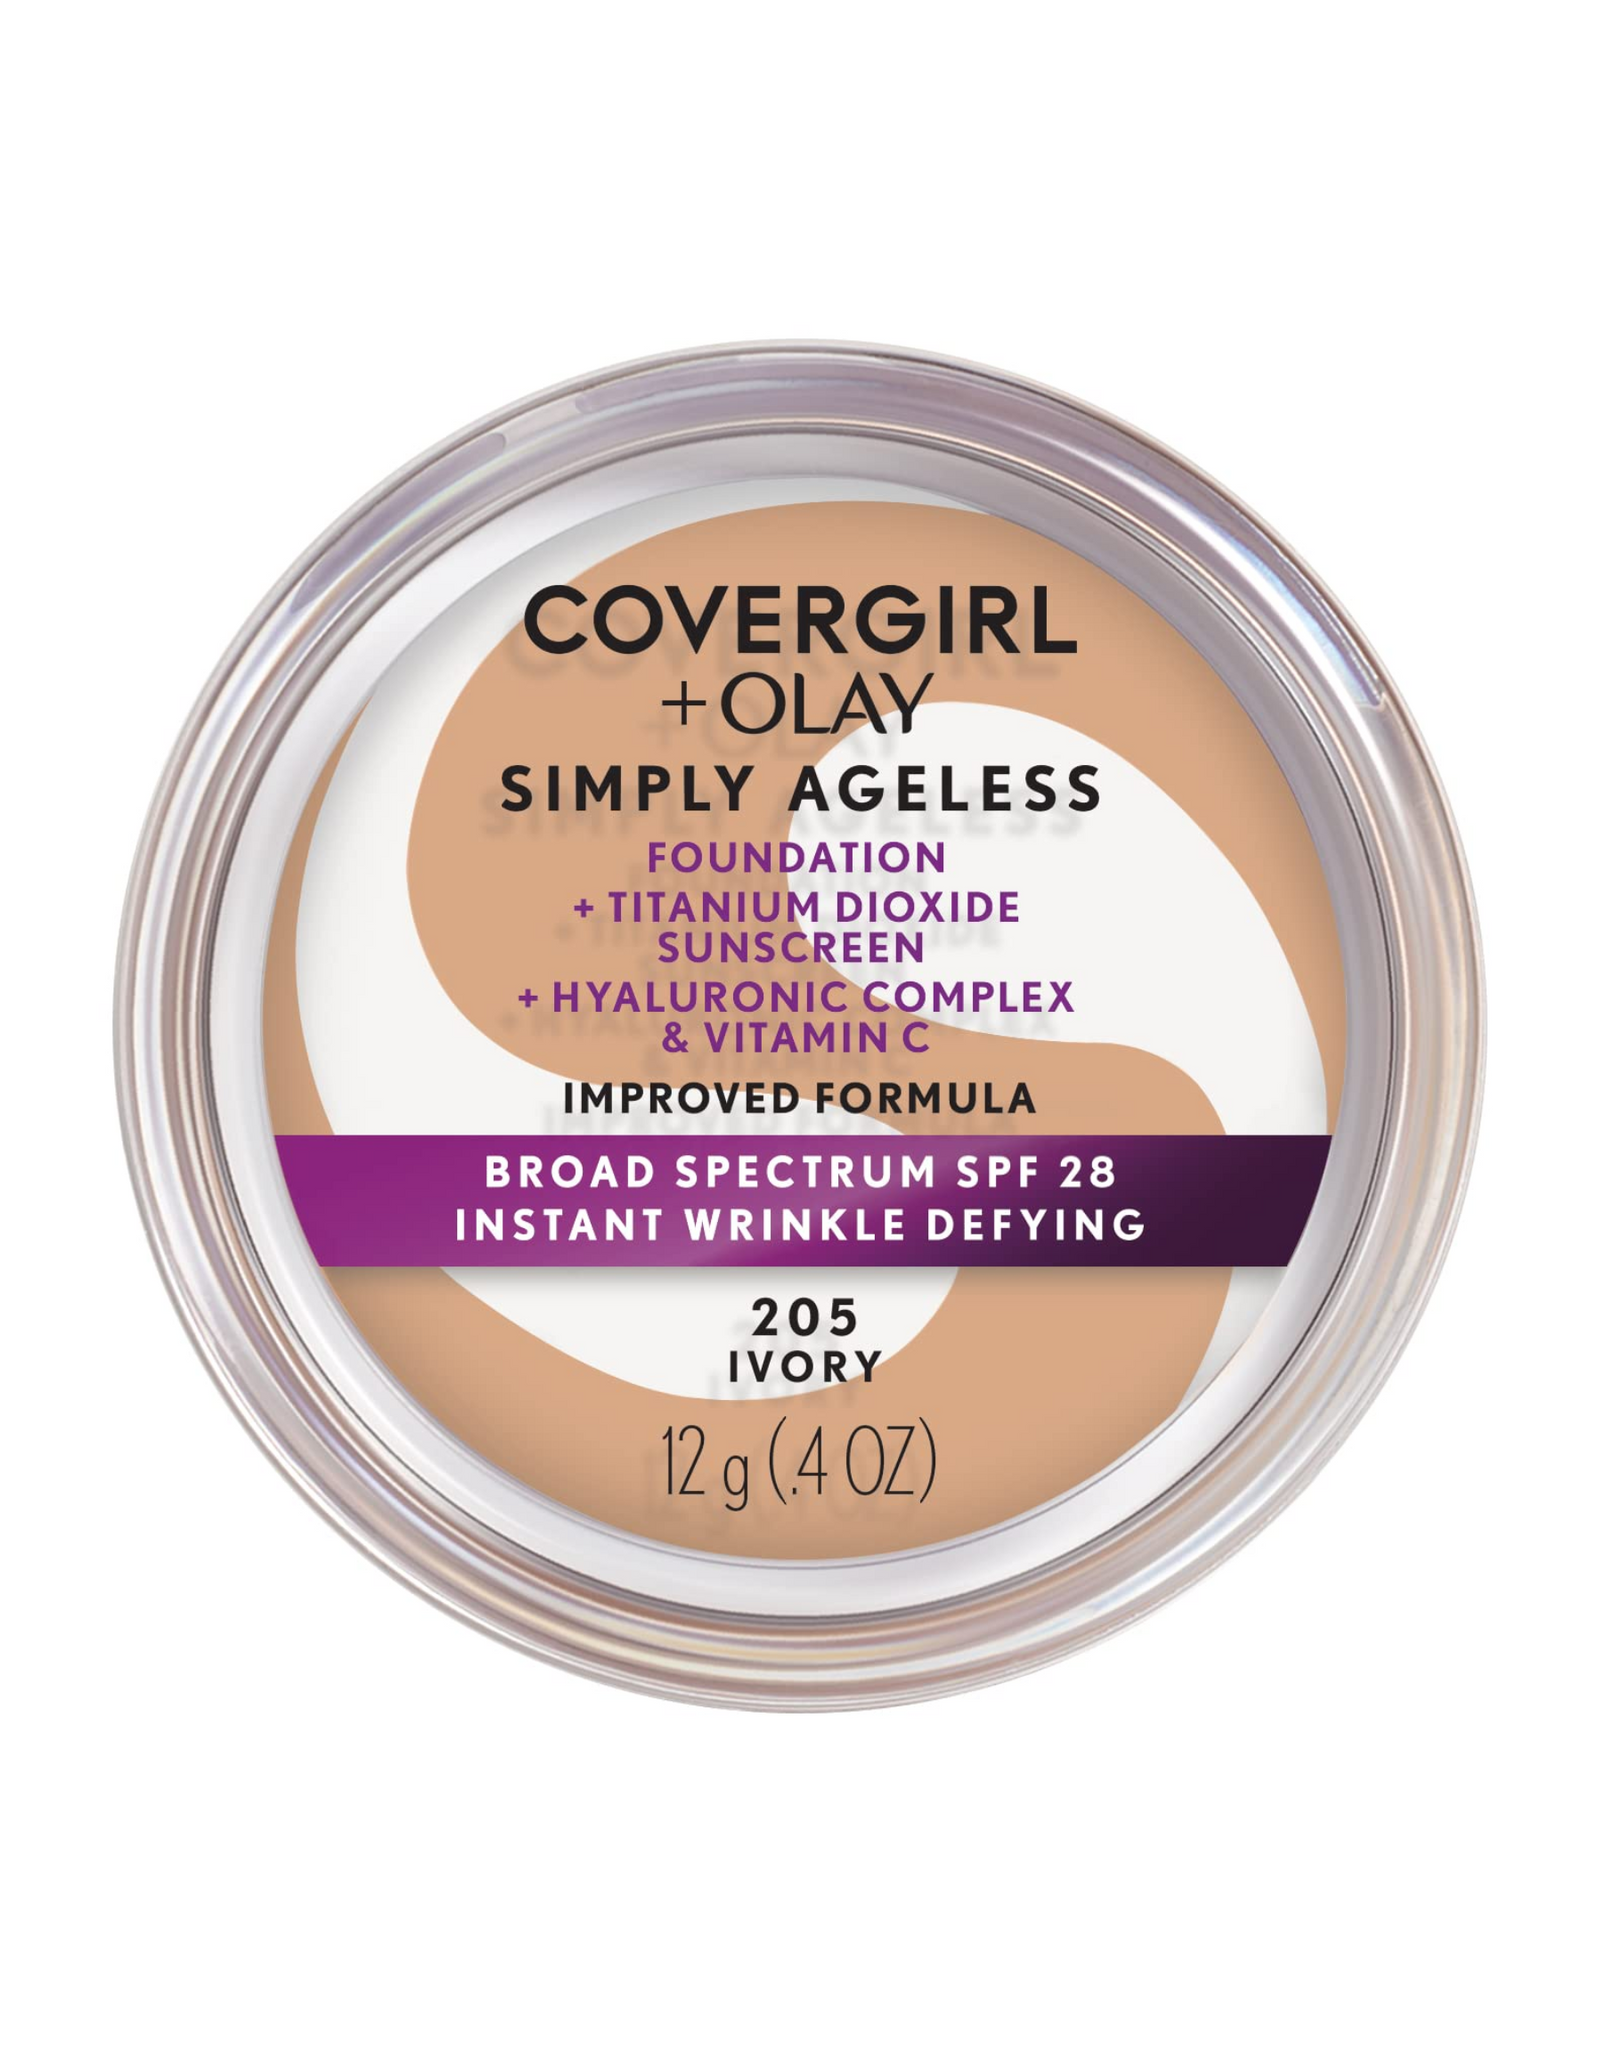 COVERGIRL+OLAY Simply Ageless Foundation with Broad Spectrum SPF 28, 205 Ivory, 0.44 oz